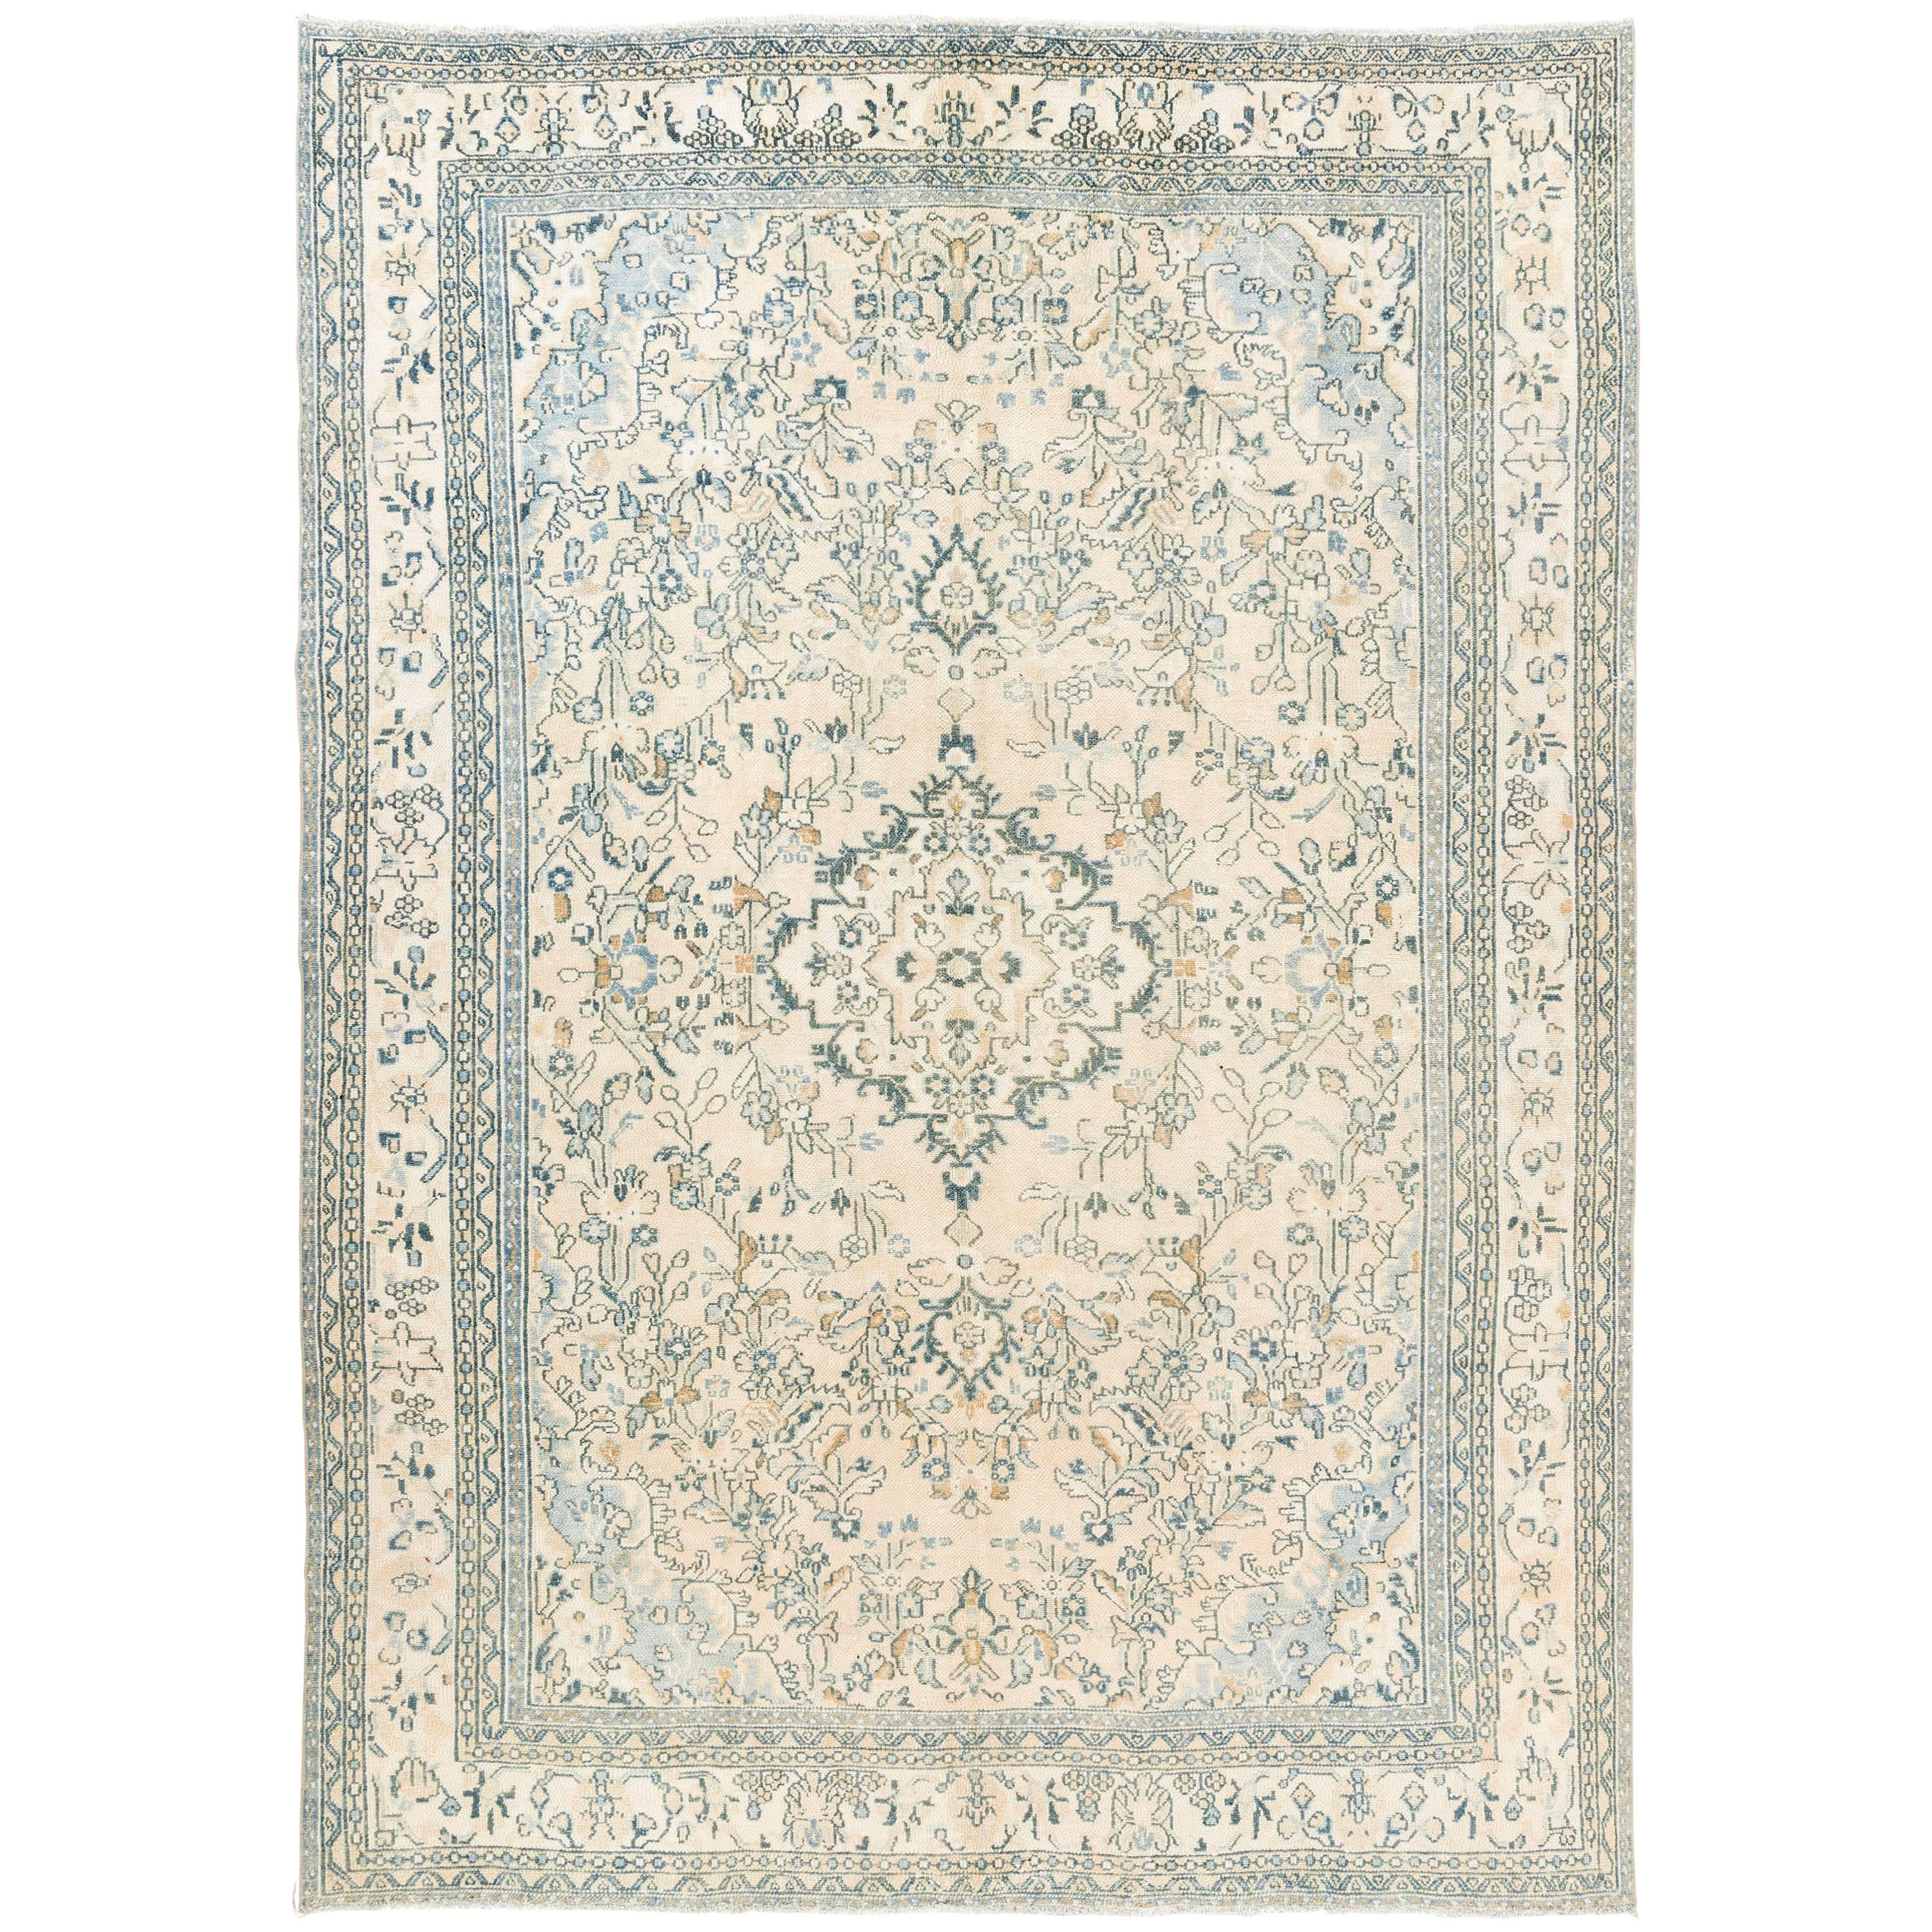 Vintage Oushak Area Rug in Soft Aqua Blue, Teal, Rust and Cream Colors